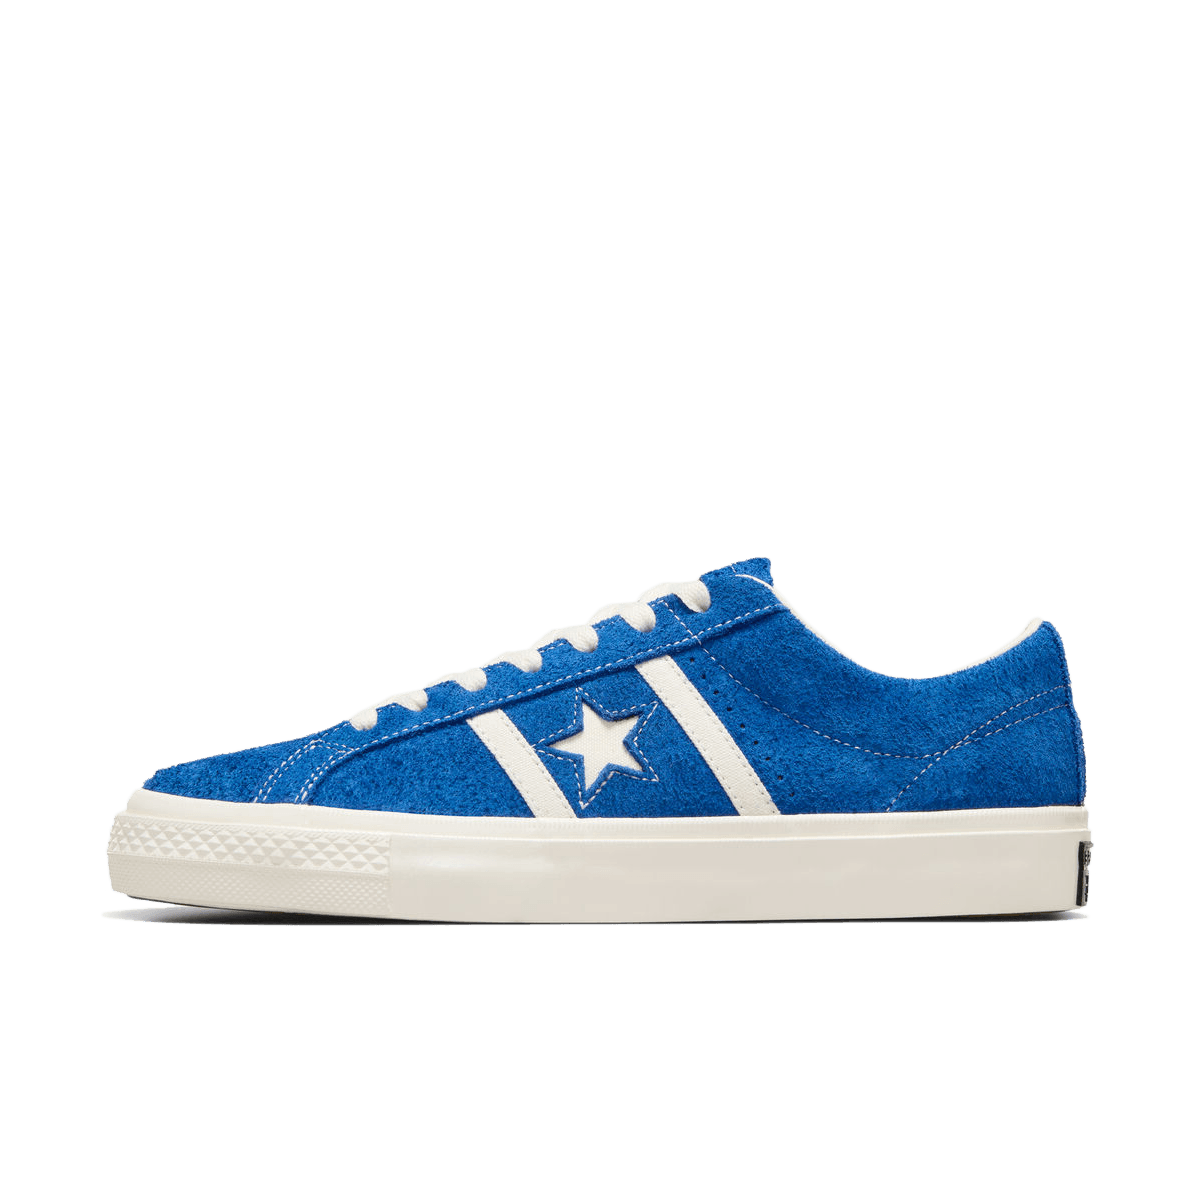 Converse One Star Academy Pro Suede 'Blue' A07311C